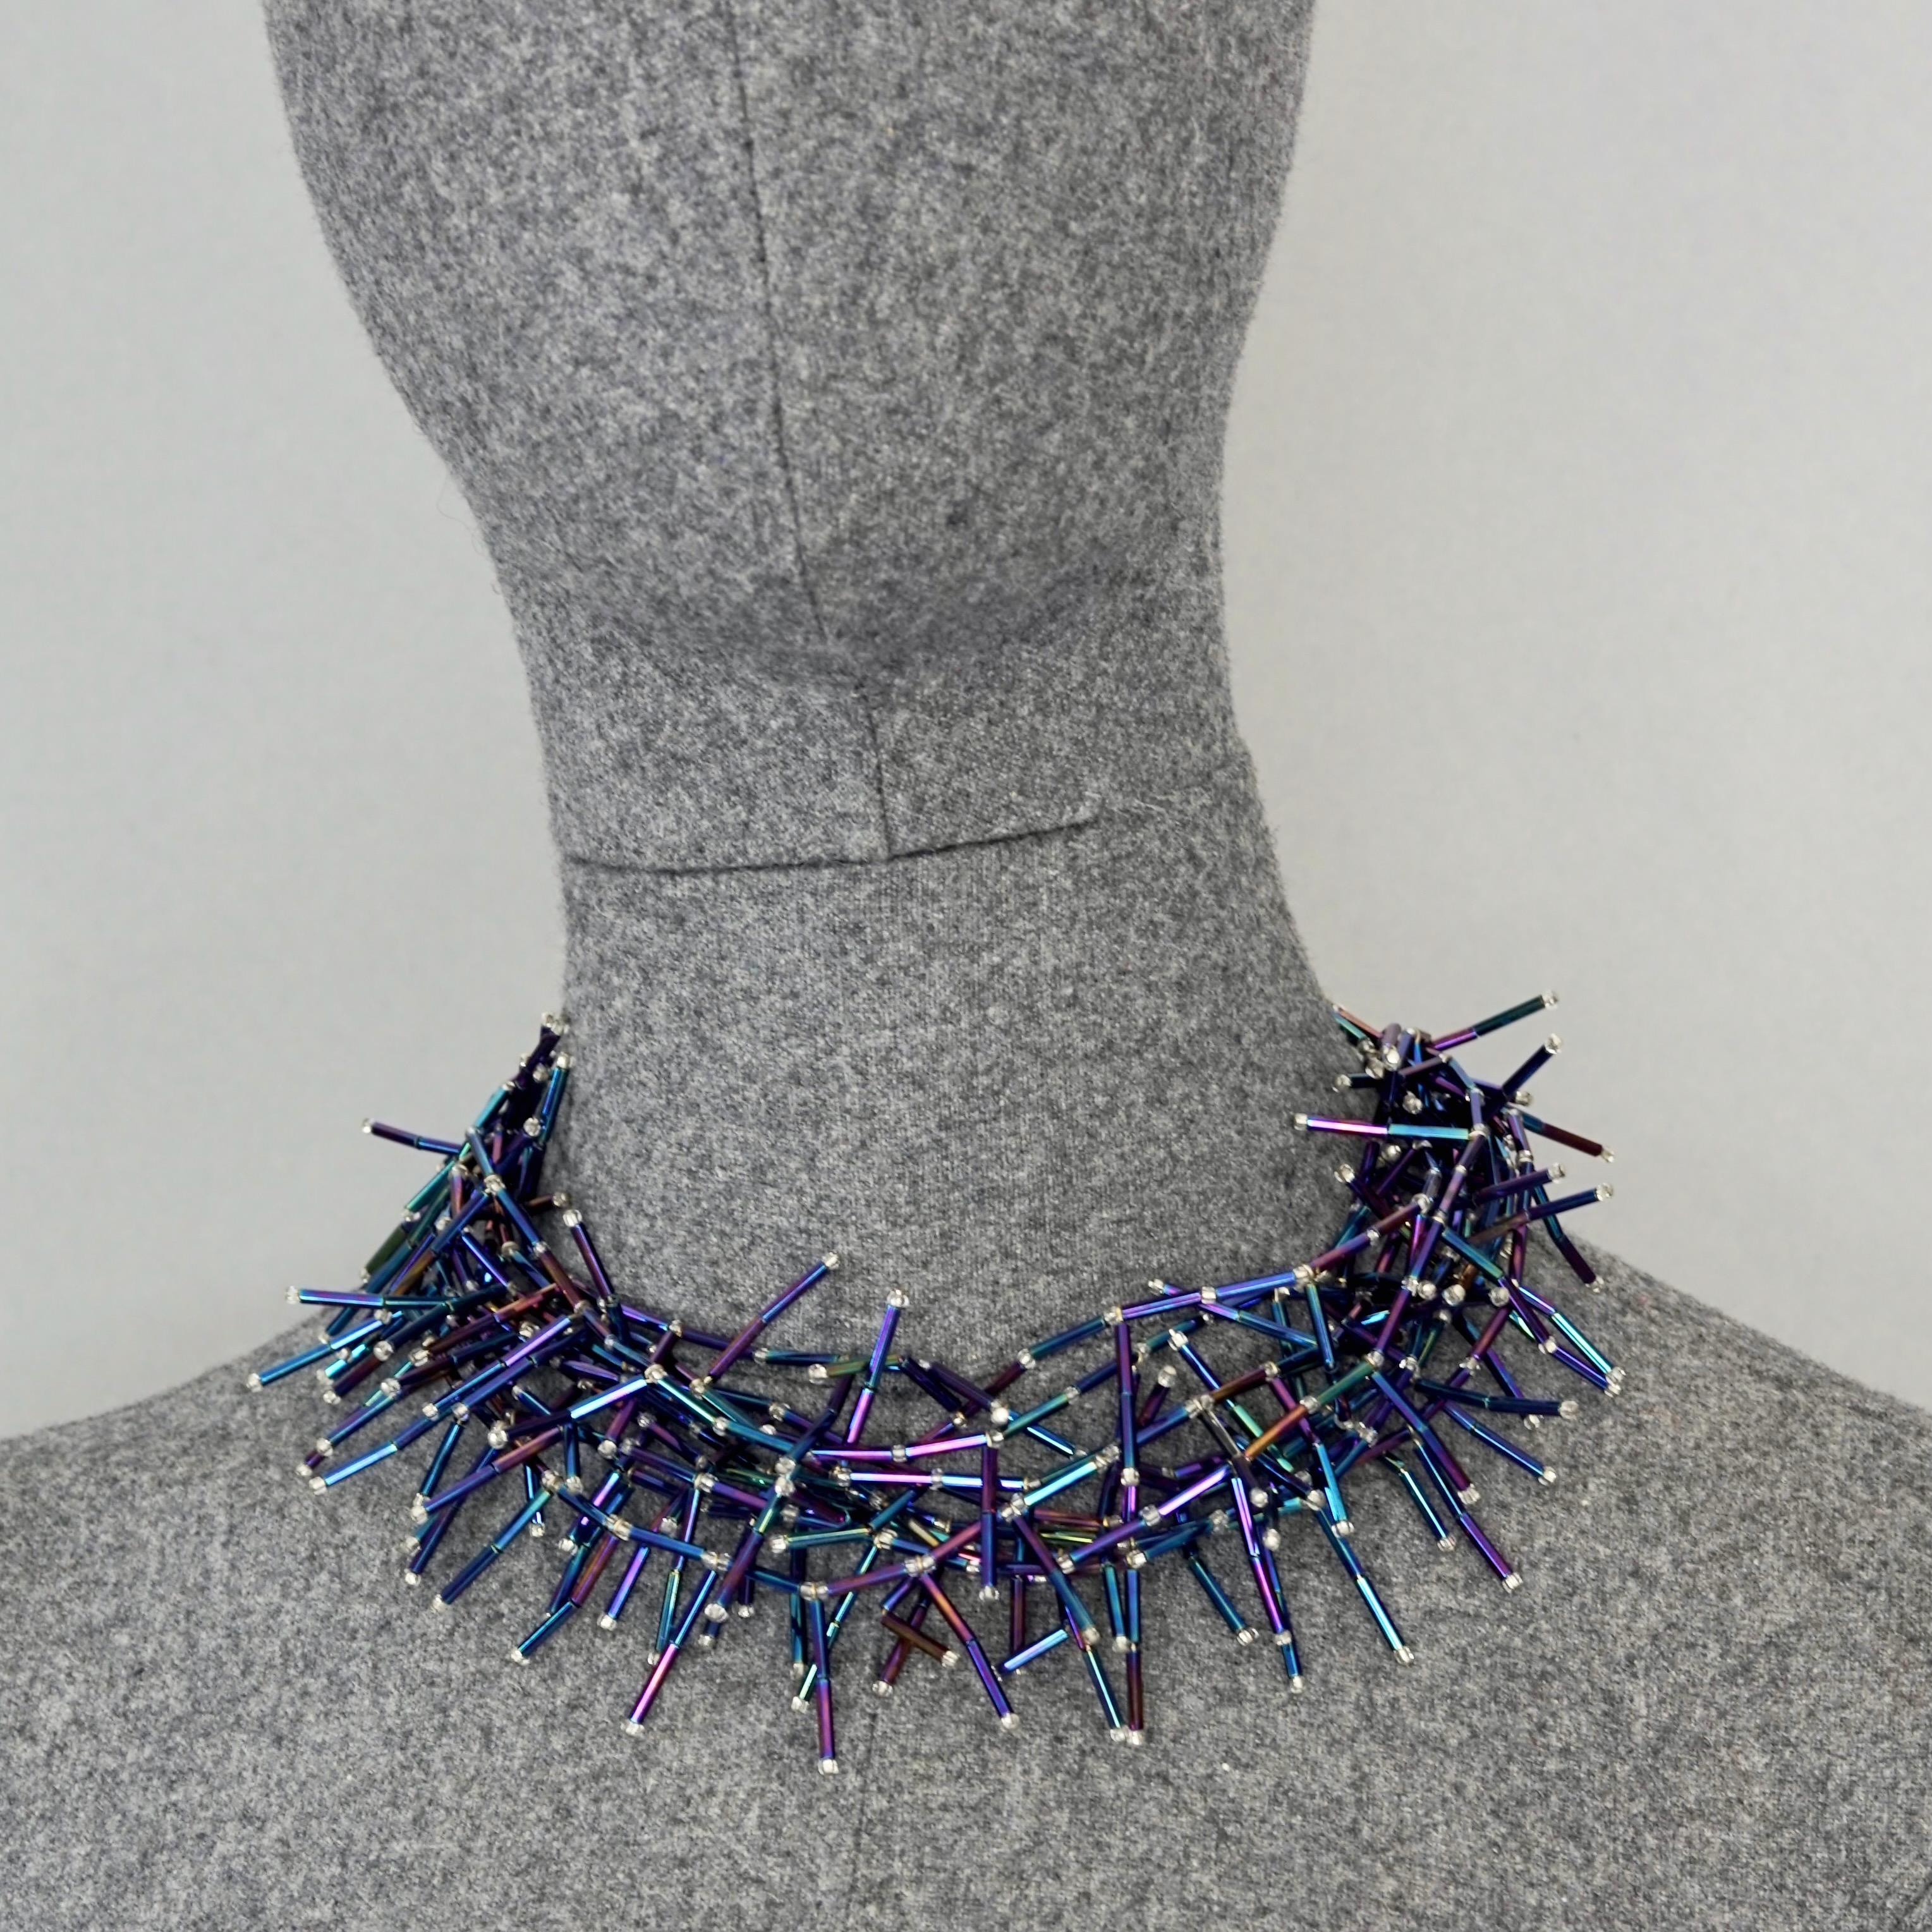 Vintage YVES SAINT LAURENT Ysl Spiky Iridescent Blue Glass Bead Choker Necklace

Measurements:
Height: 3.94 inches (10 cm)
Length: 13.77 inches to 25.19 inches (35 cm to 64 cm) adjustable

Features:
- 100% Authentic YVES SAINT LAURENT.
- Spiky